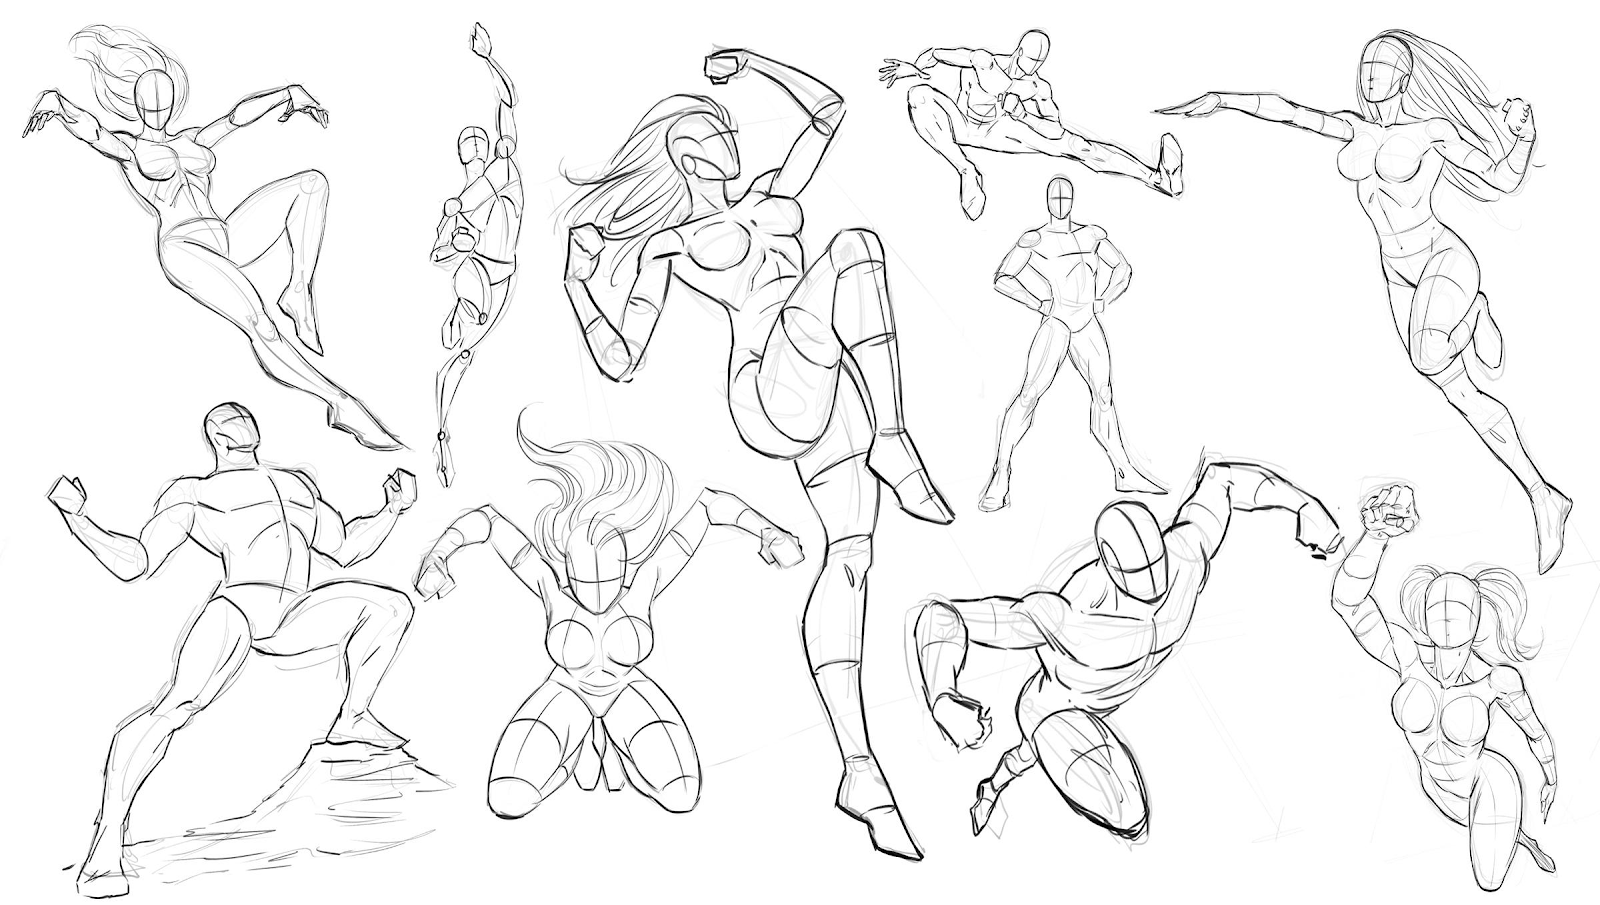 How to Draw Poses: A Step-by-Step Guide from Beginner to Mastery